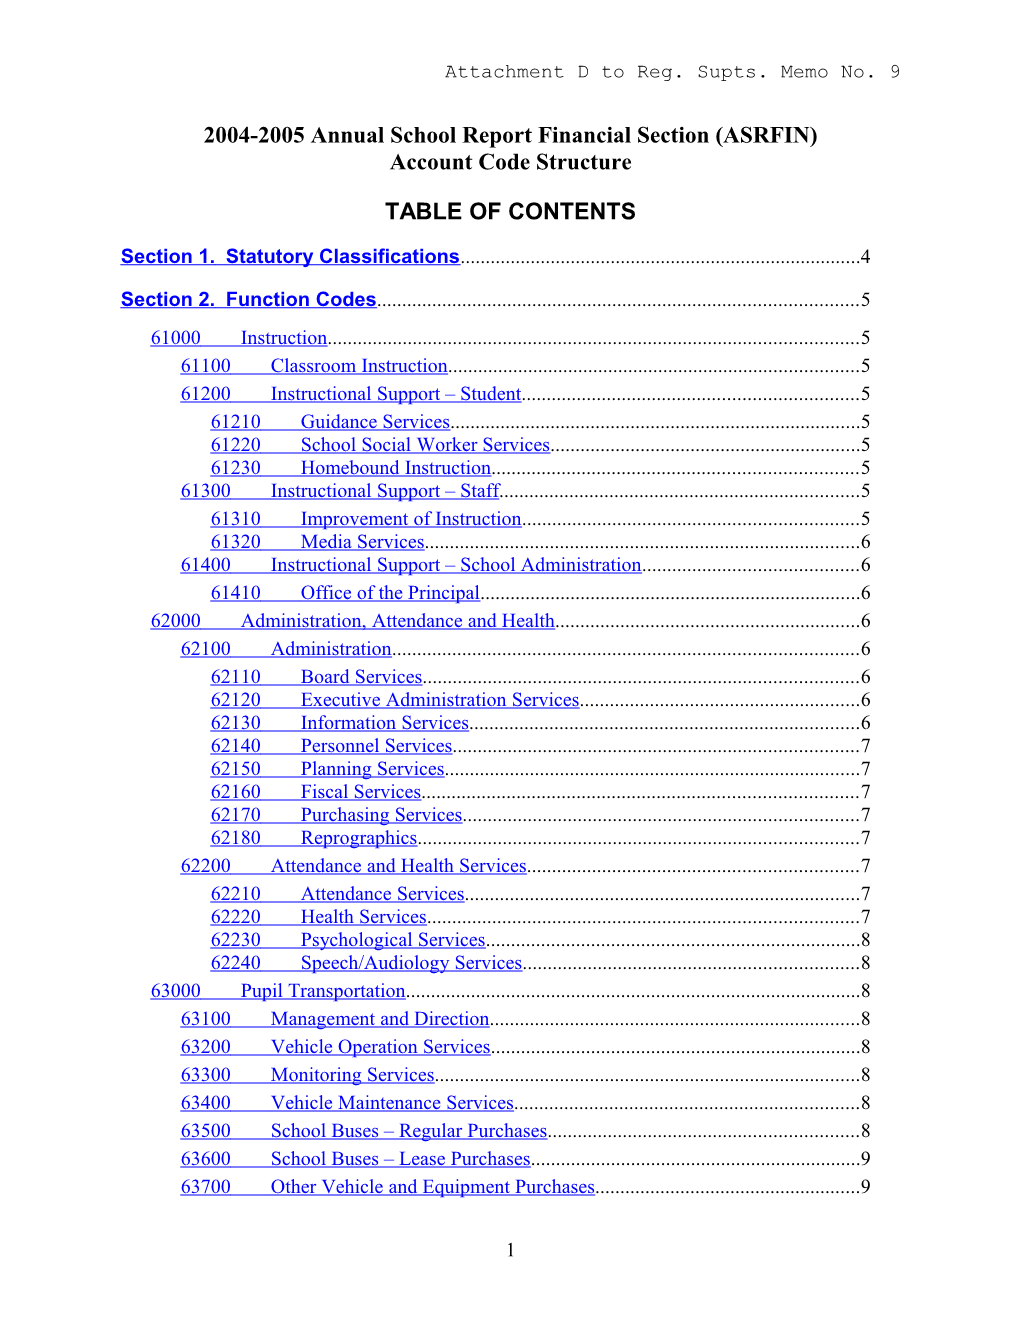 2004-2005 Annual School Report Financial Section (ASRFIN)